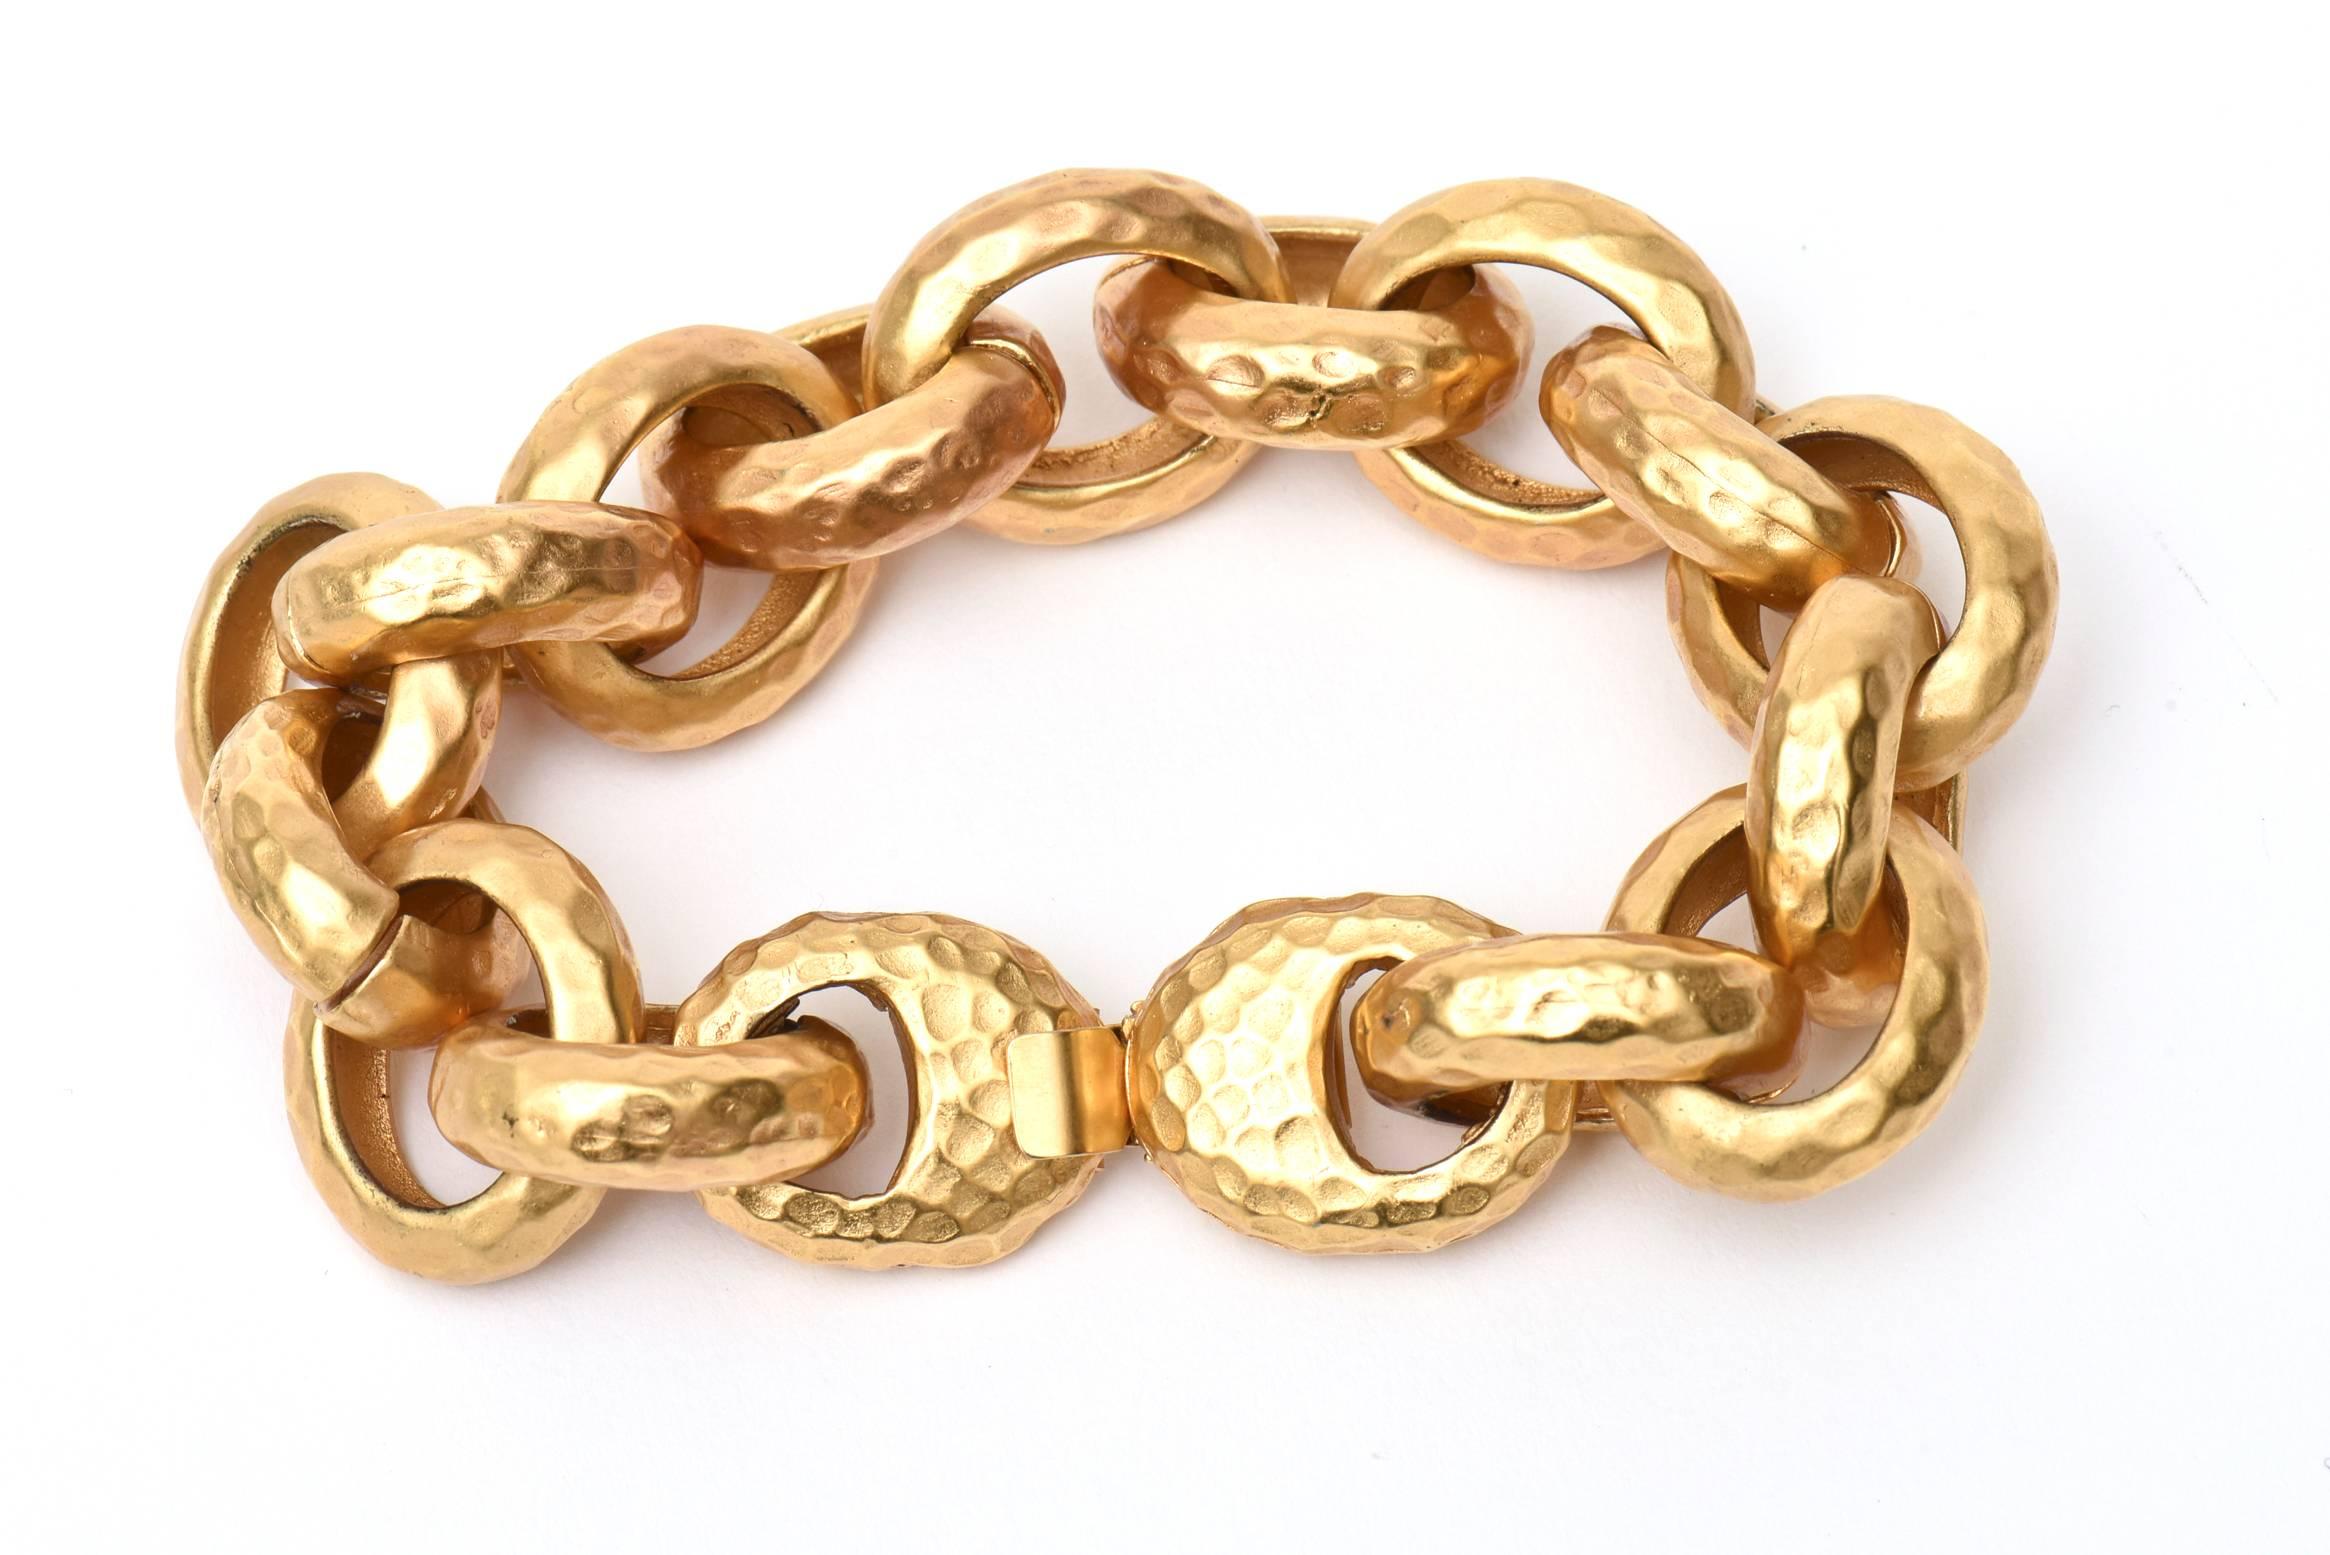 This versatile and stunning gold plated chain link bracelet looks like the real thing.
It is hand hammered and fits the wrist beautifully. It has a textural nature from the hand hammering. Great for everyday use  and can go day to evening. This is a